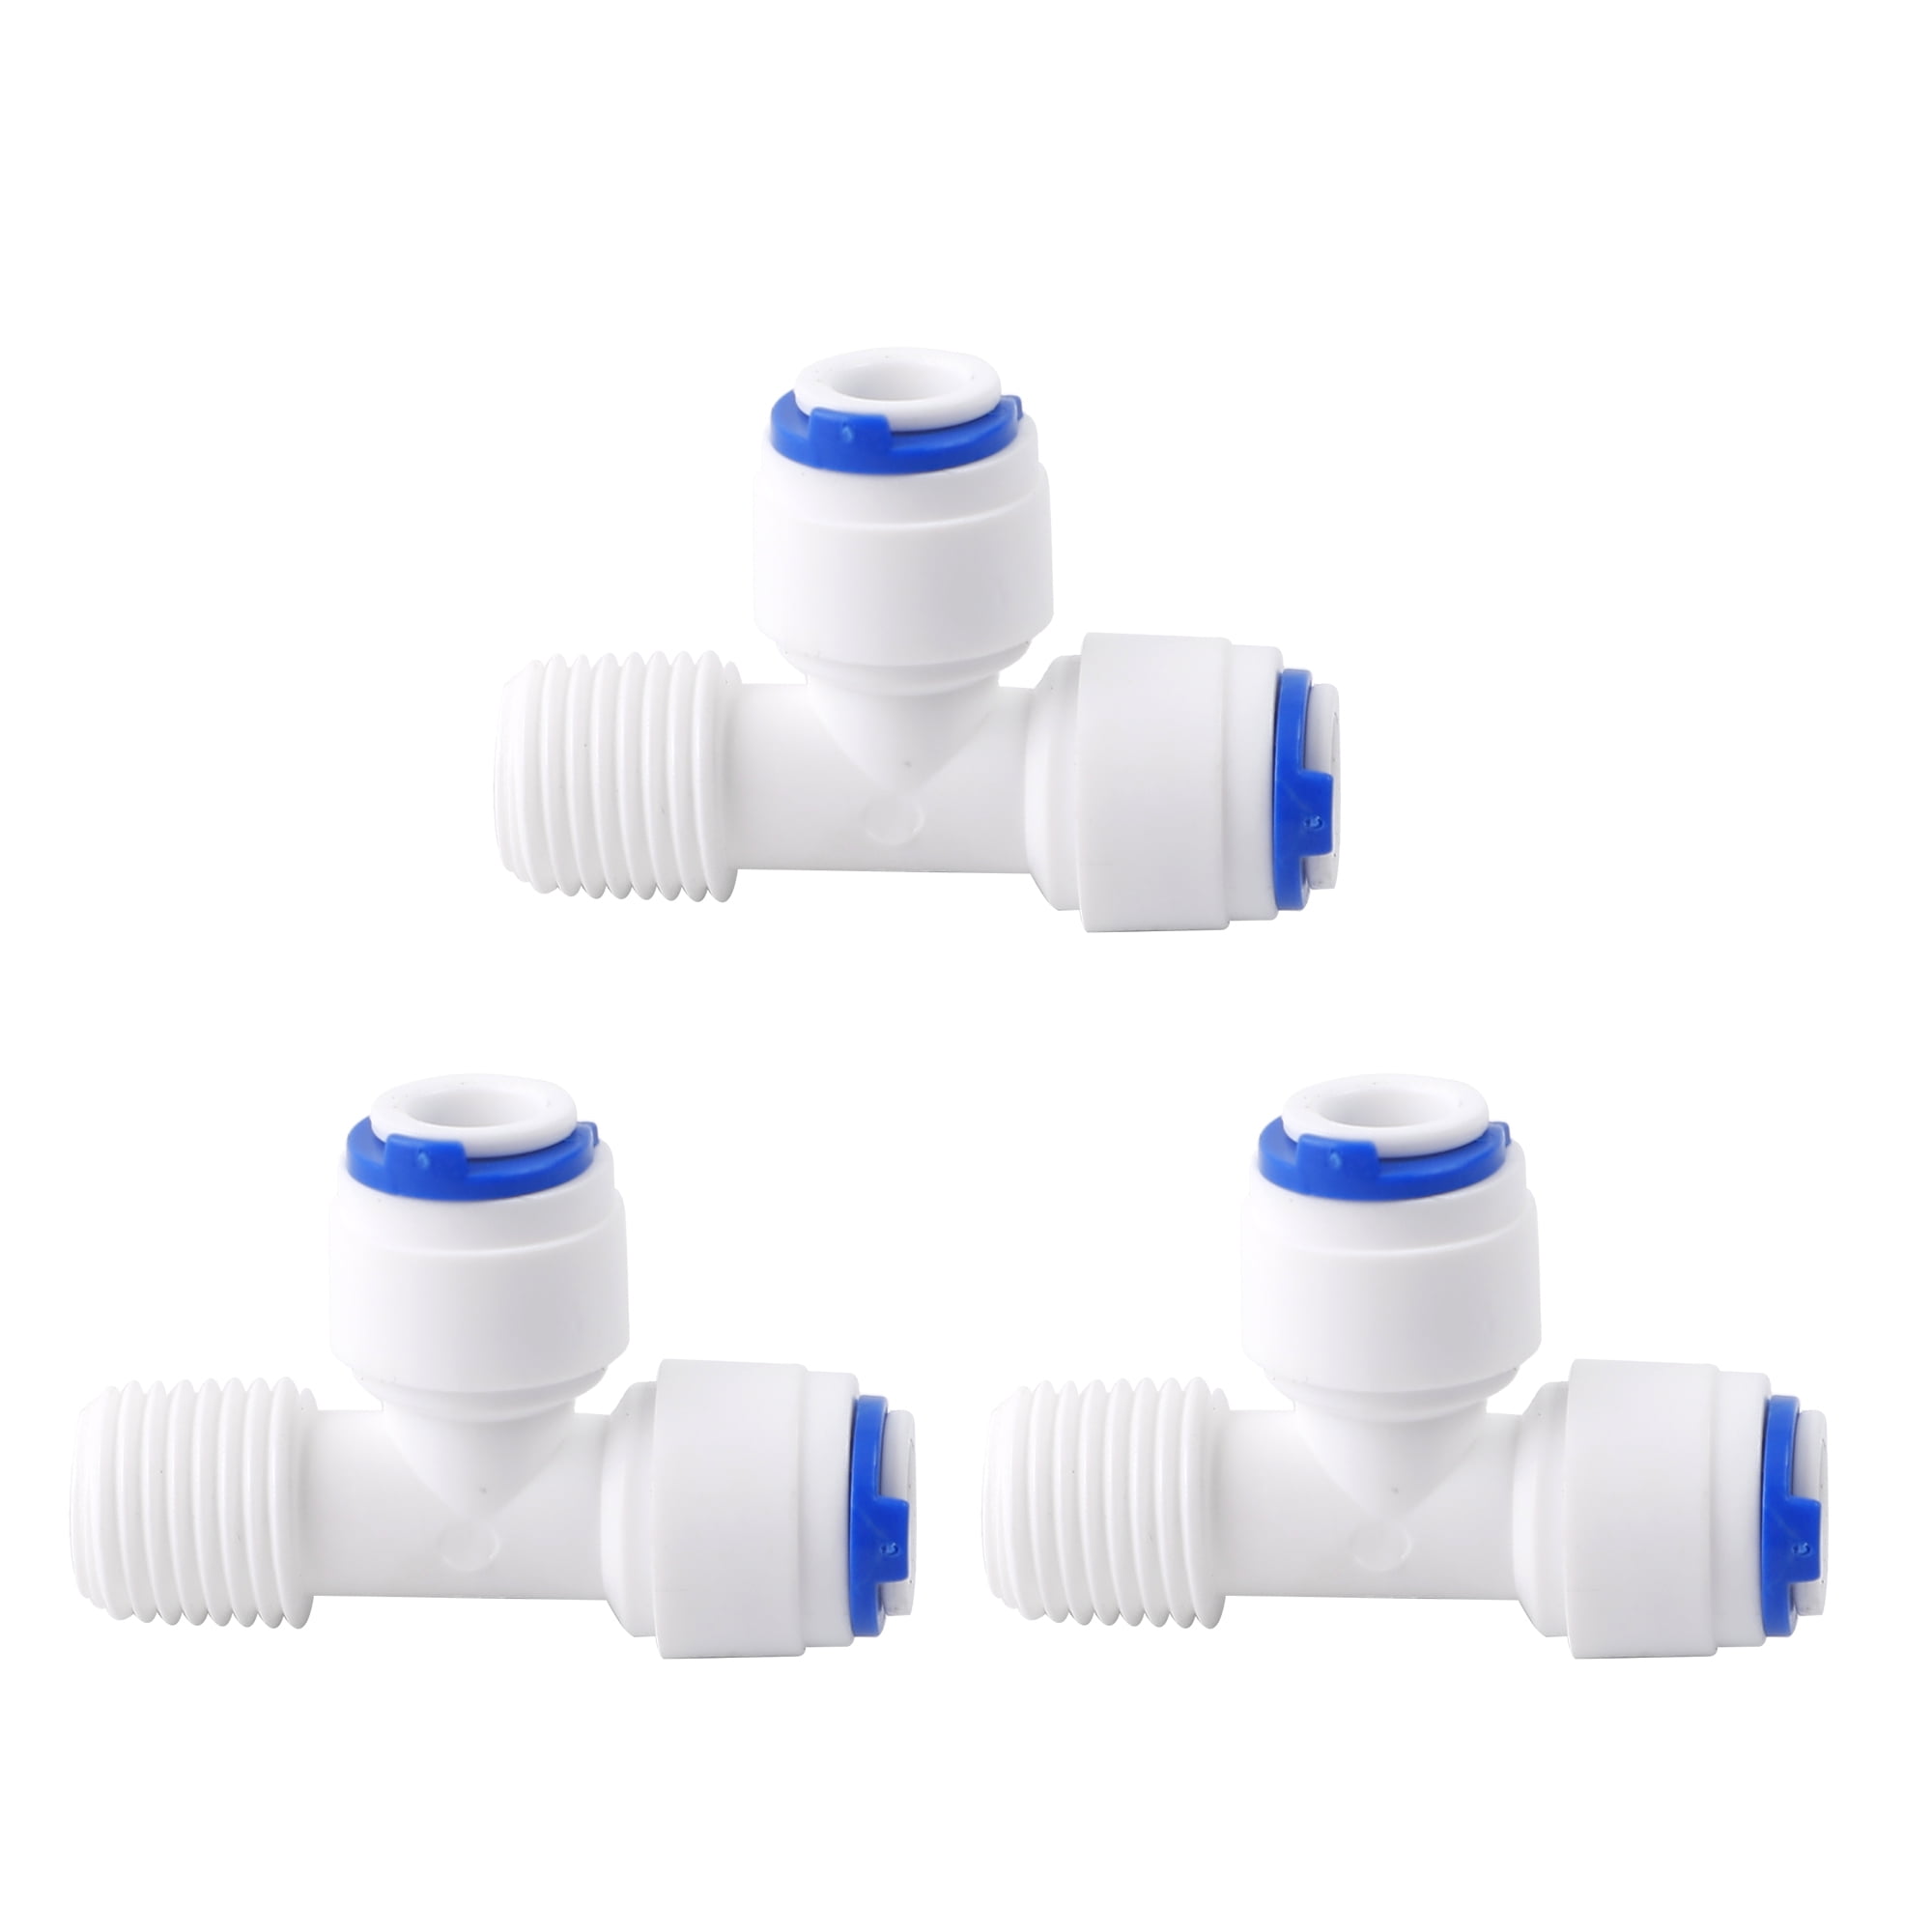 10x 1/4" Tee Quick Connector Push fit for RO Water Reverse Osmosis Filter @ 